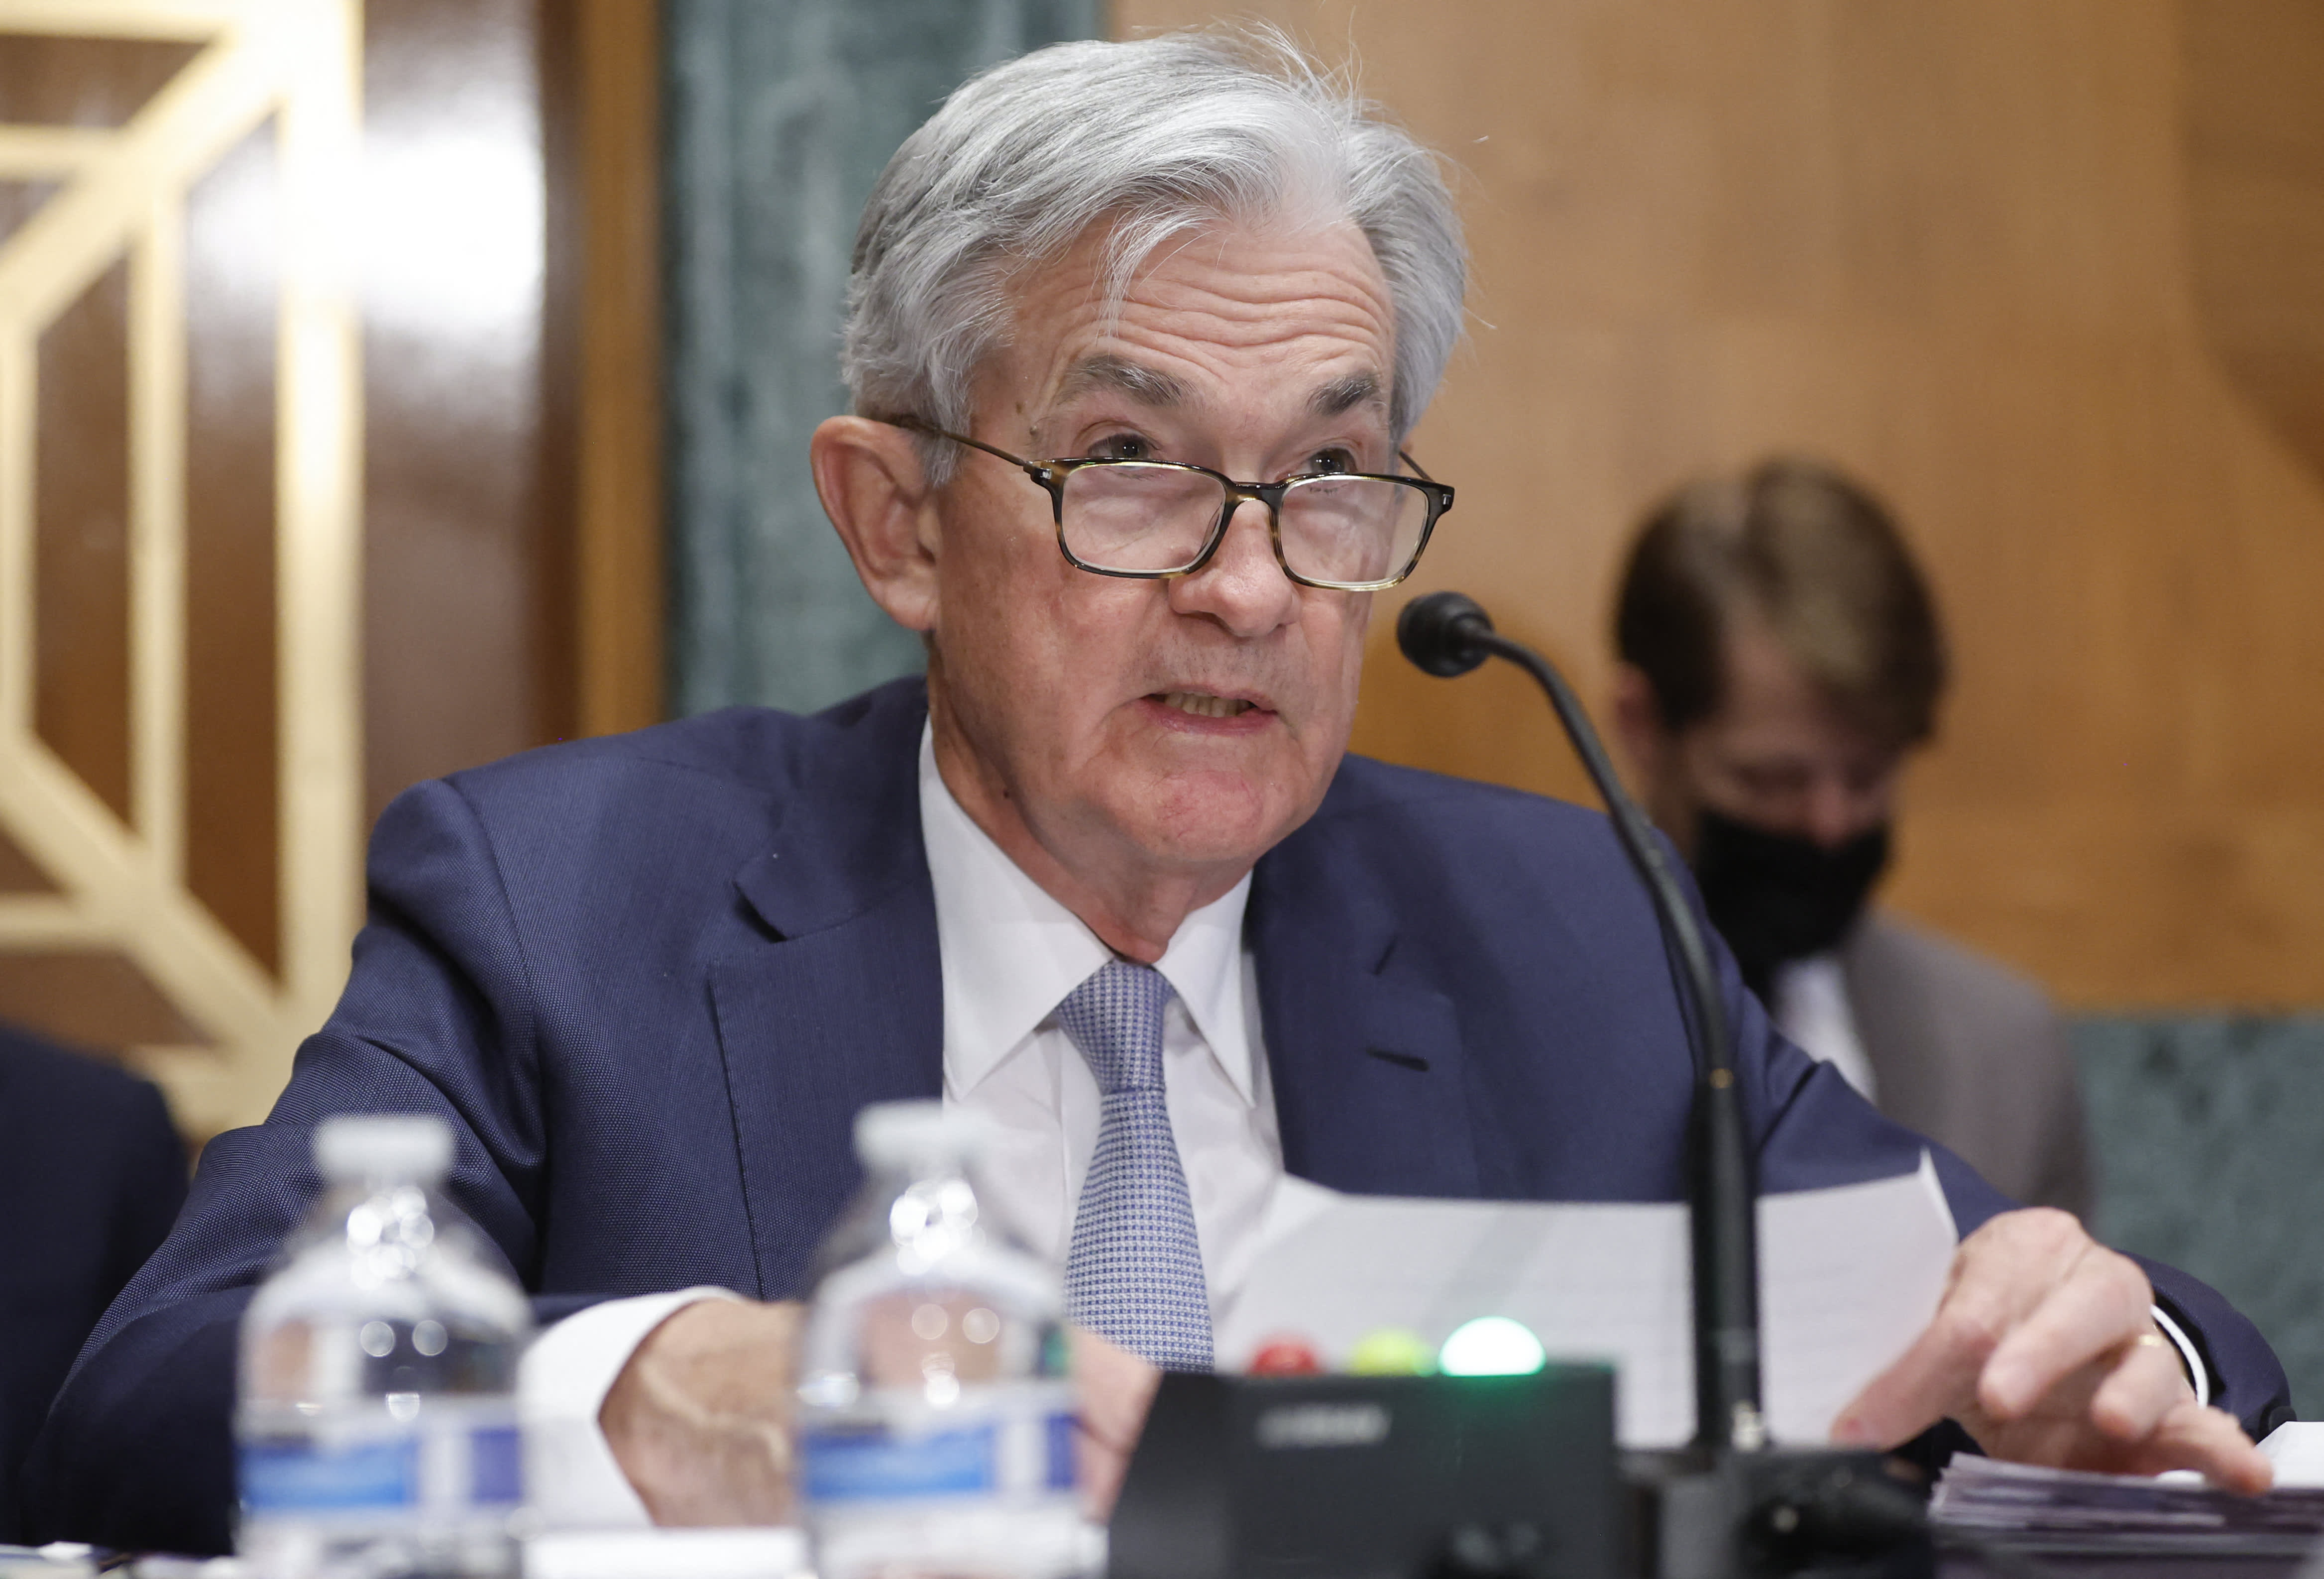 Watch Federal Reserve Chair Powell speak live on policy before Senate committee